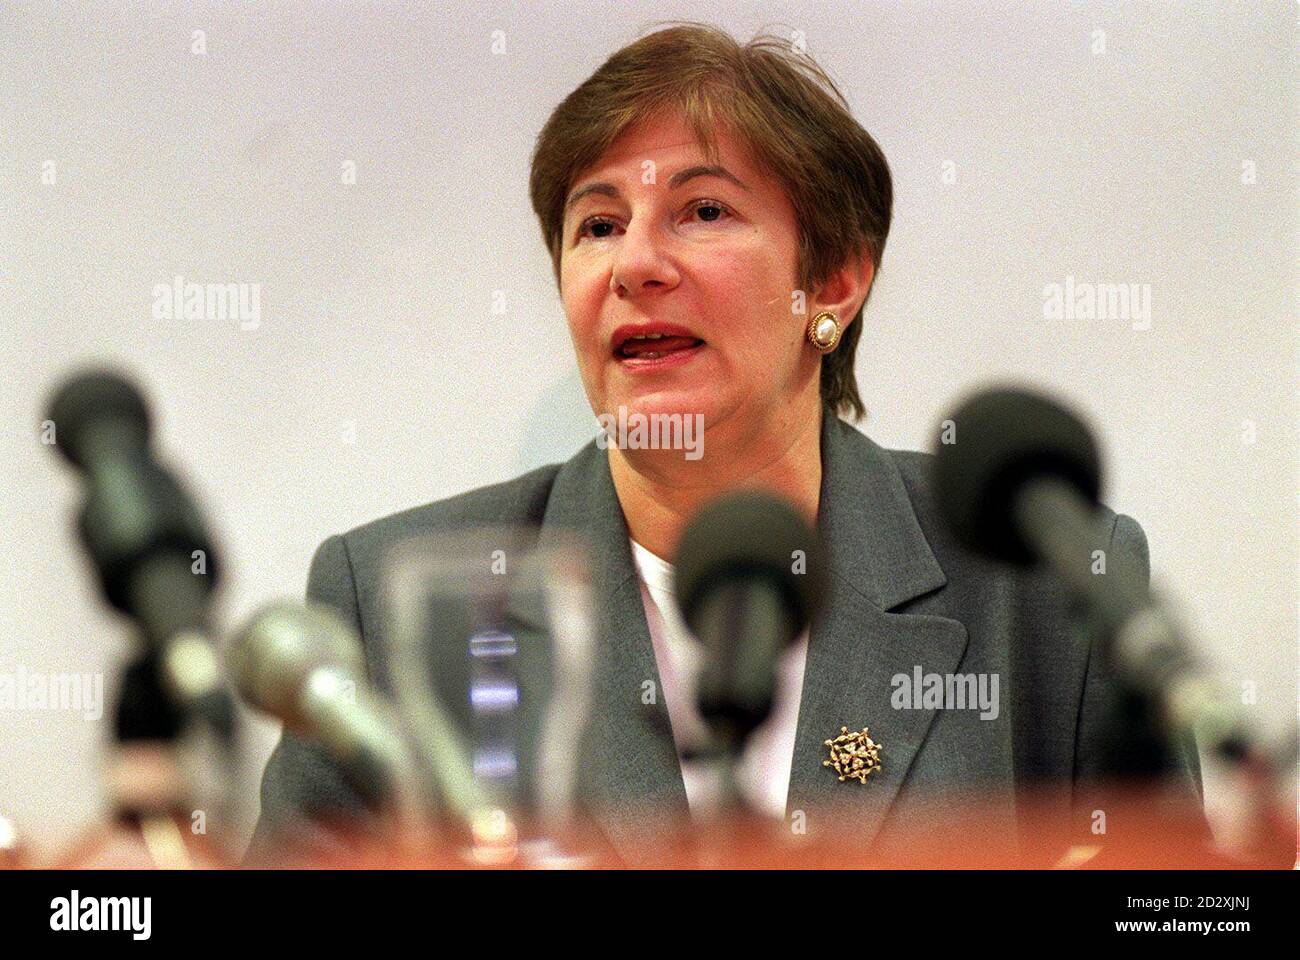 Ruth Deech, chairwoman of the Human Fertilisation and Embrology Authority, announcing the decision to allow widow Diane Blood to try for a baby using her dead husband's frozen sperm, ending a two-year legal battle. Stock Photo